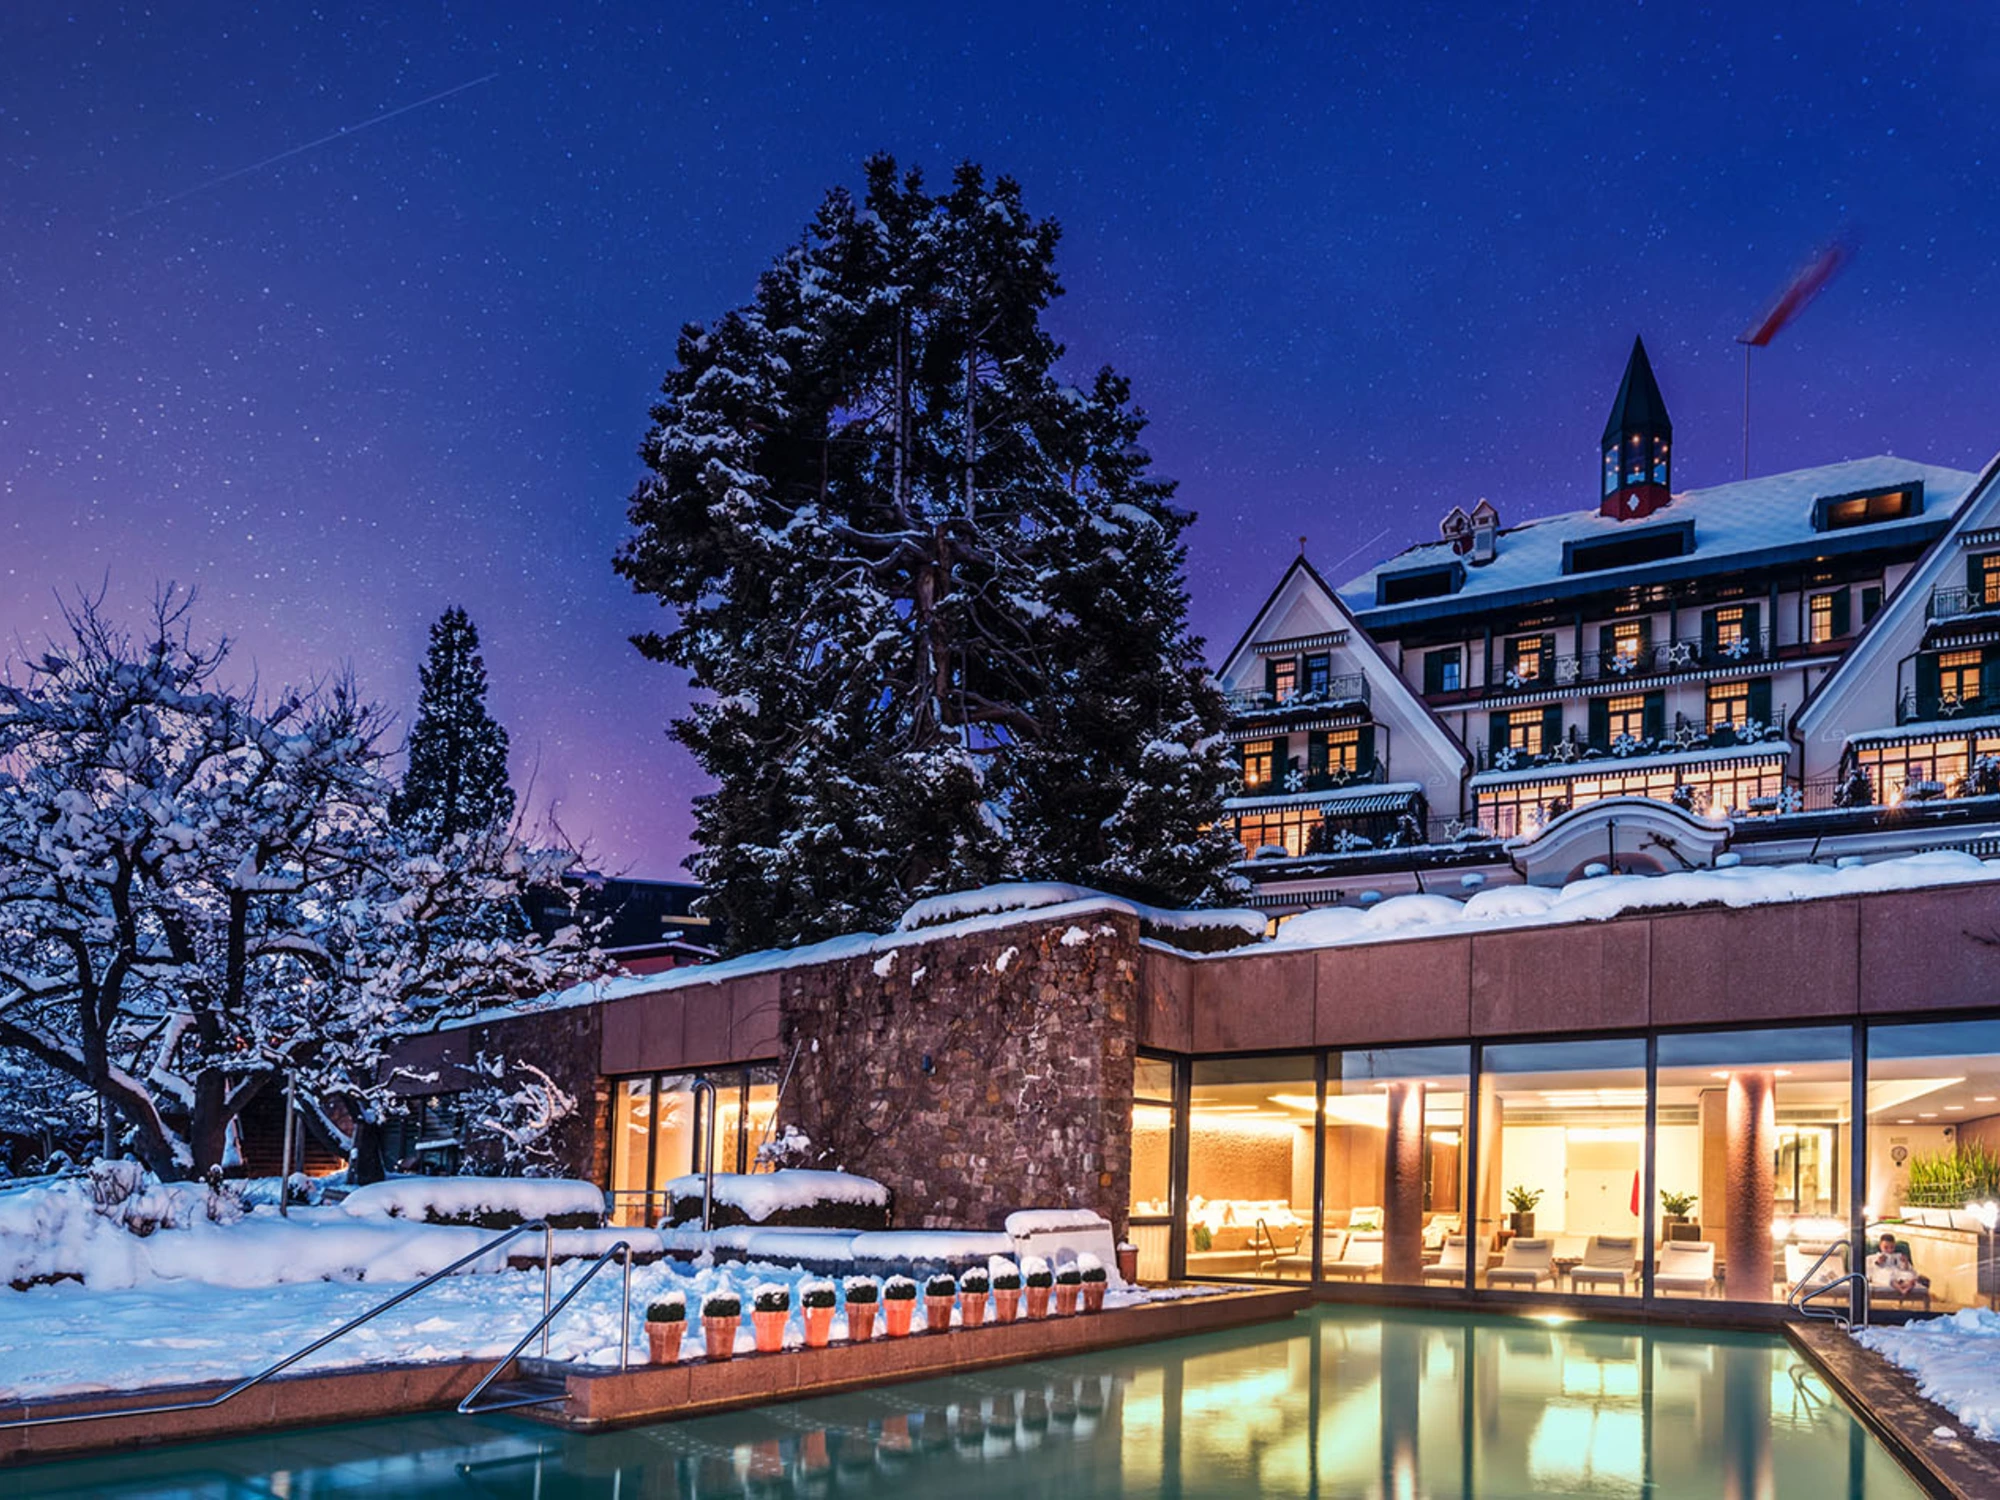 Parkhotel Holzner in winter by night (c) Photo Hannes Niederkofler